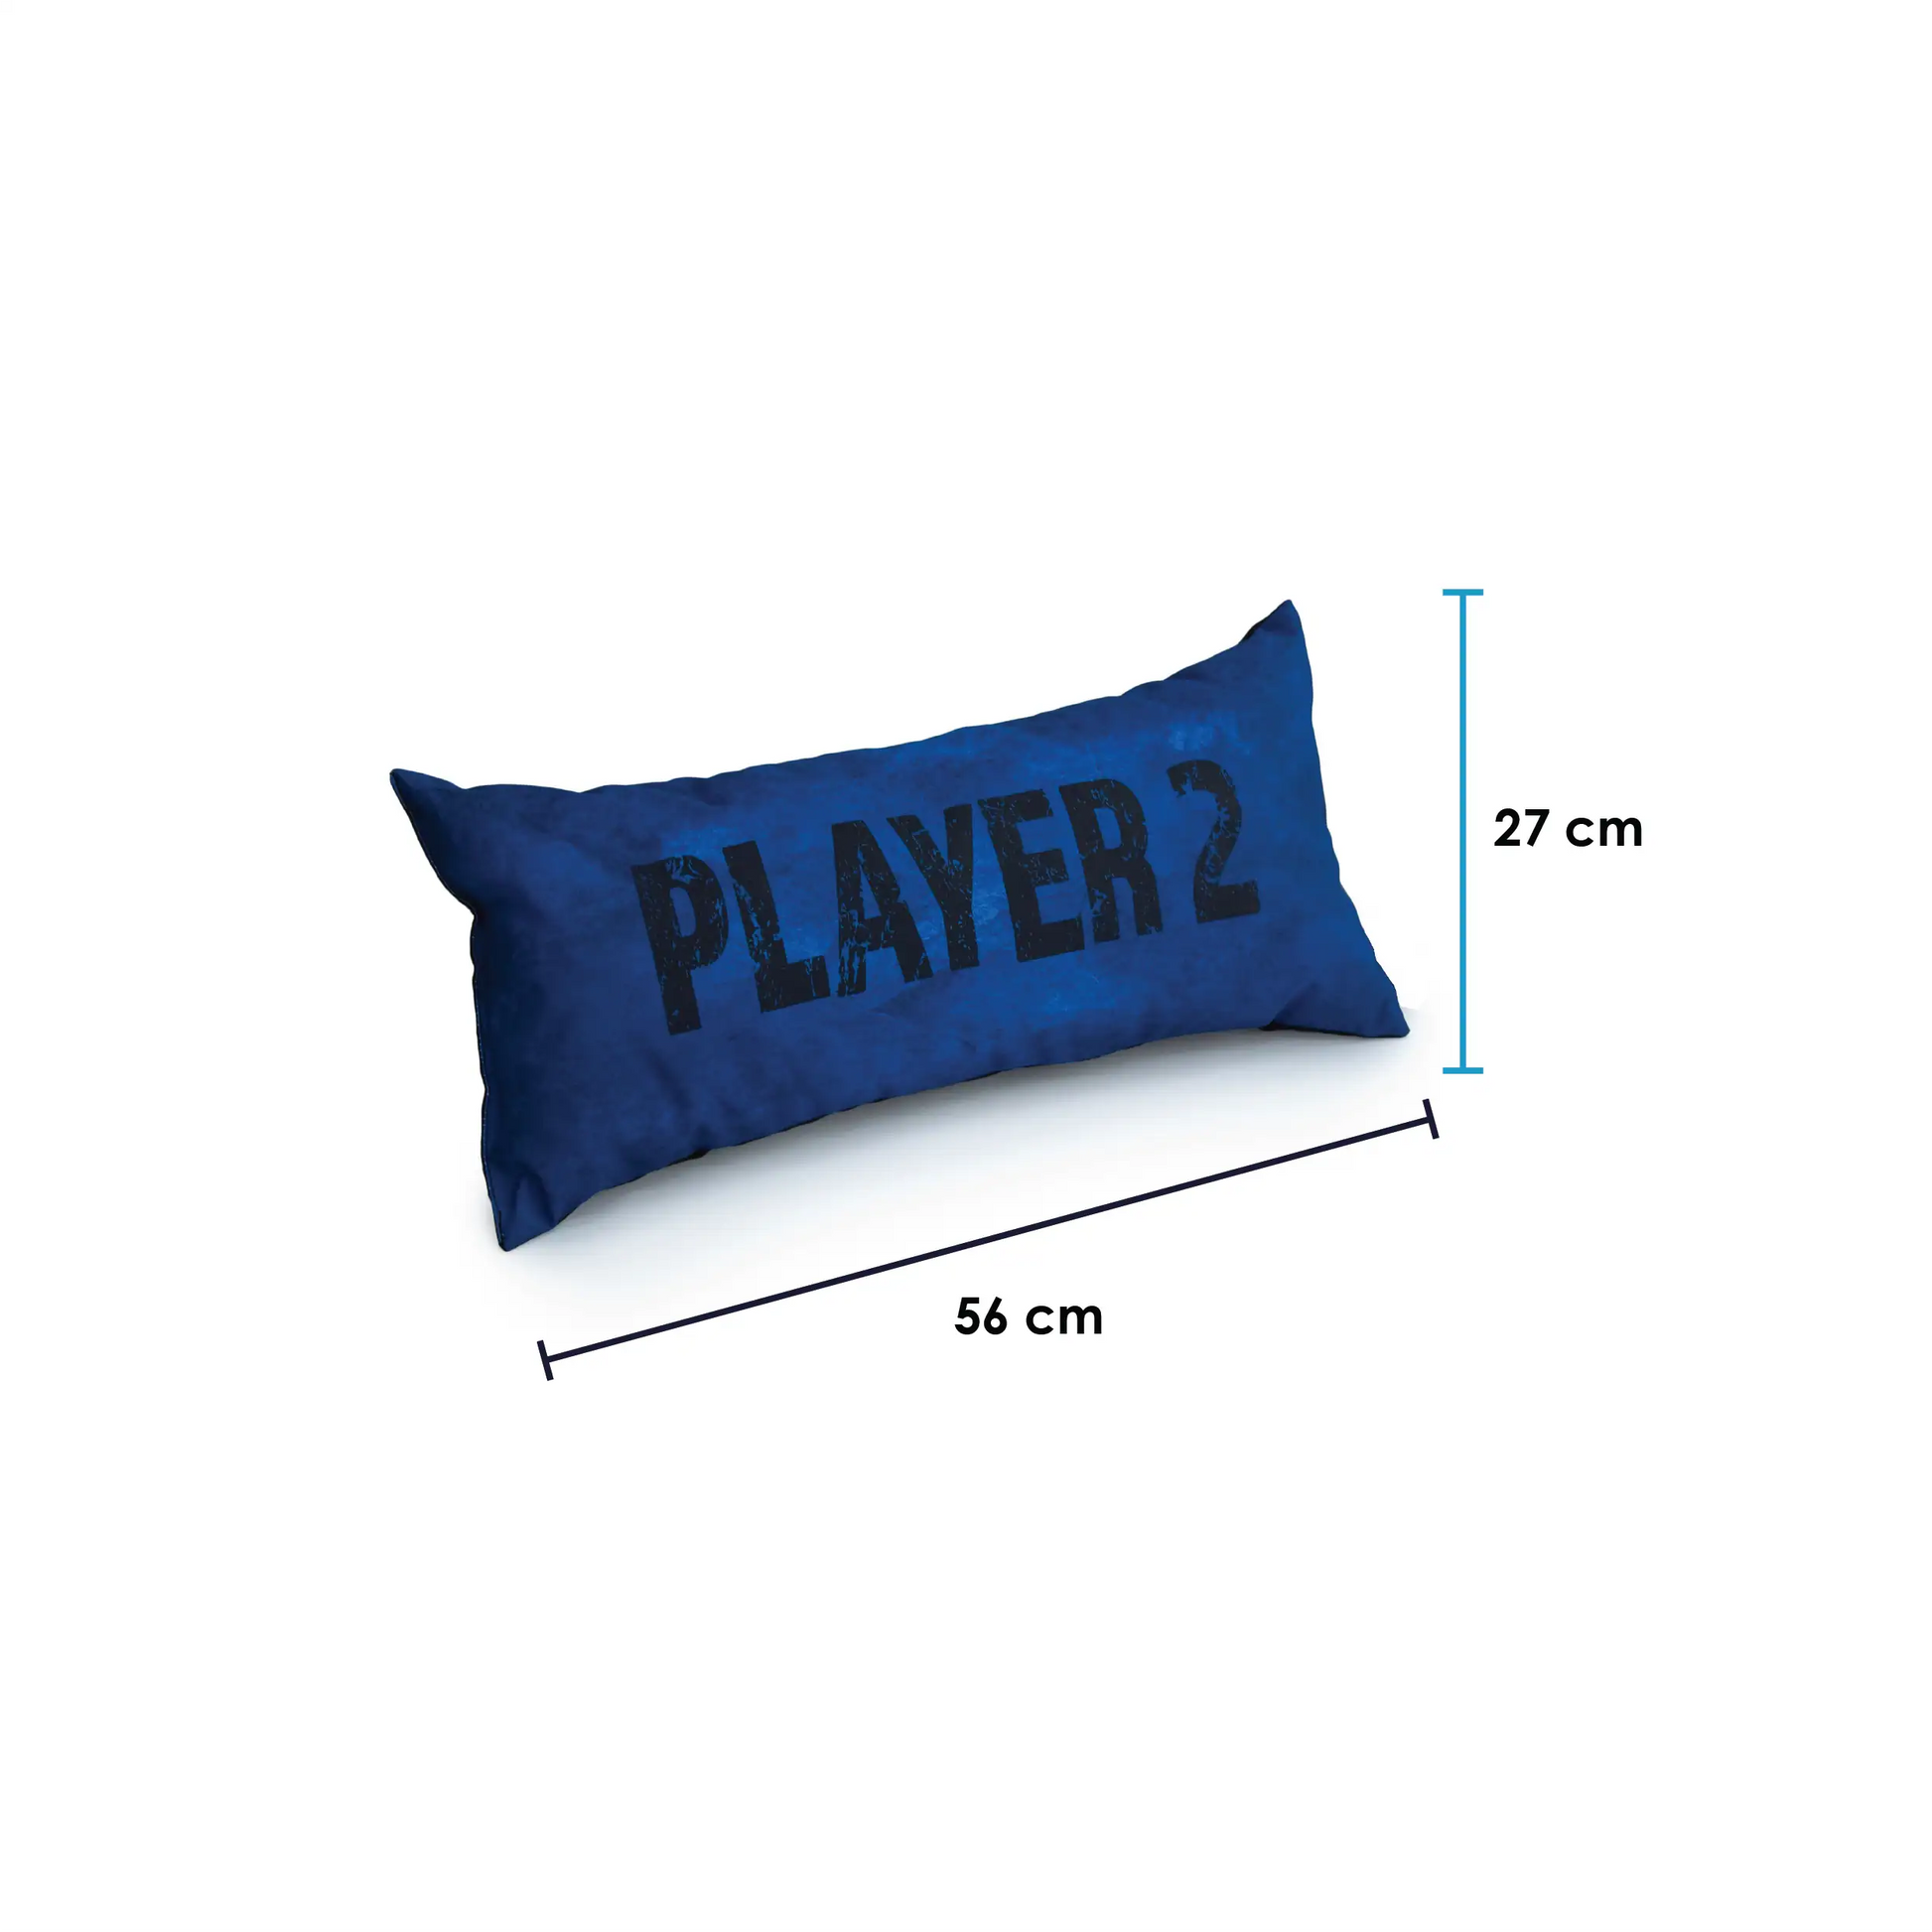 A blue pillow with the words "player 2" written on it.